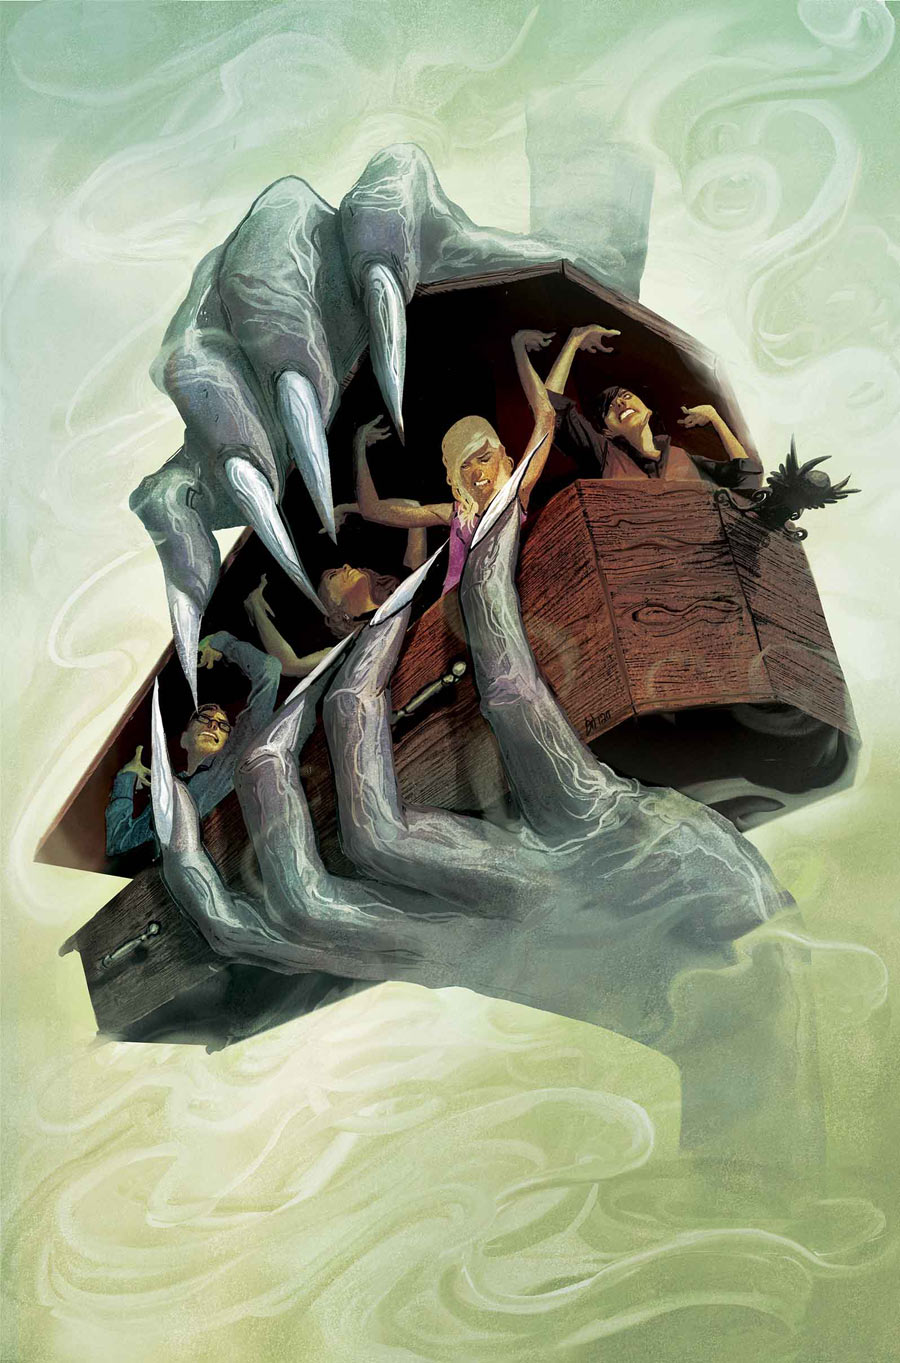 DISNEY KINGDOMS: SEEKERS OF THE WEIRD #5 (OF 5)